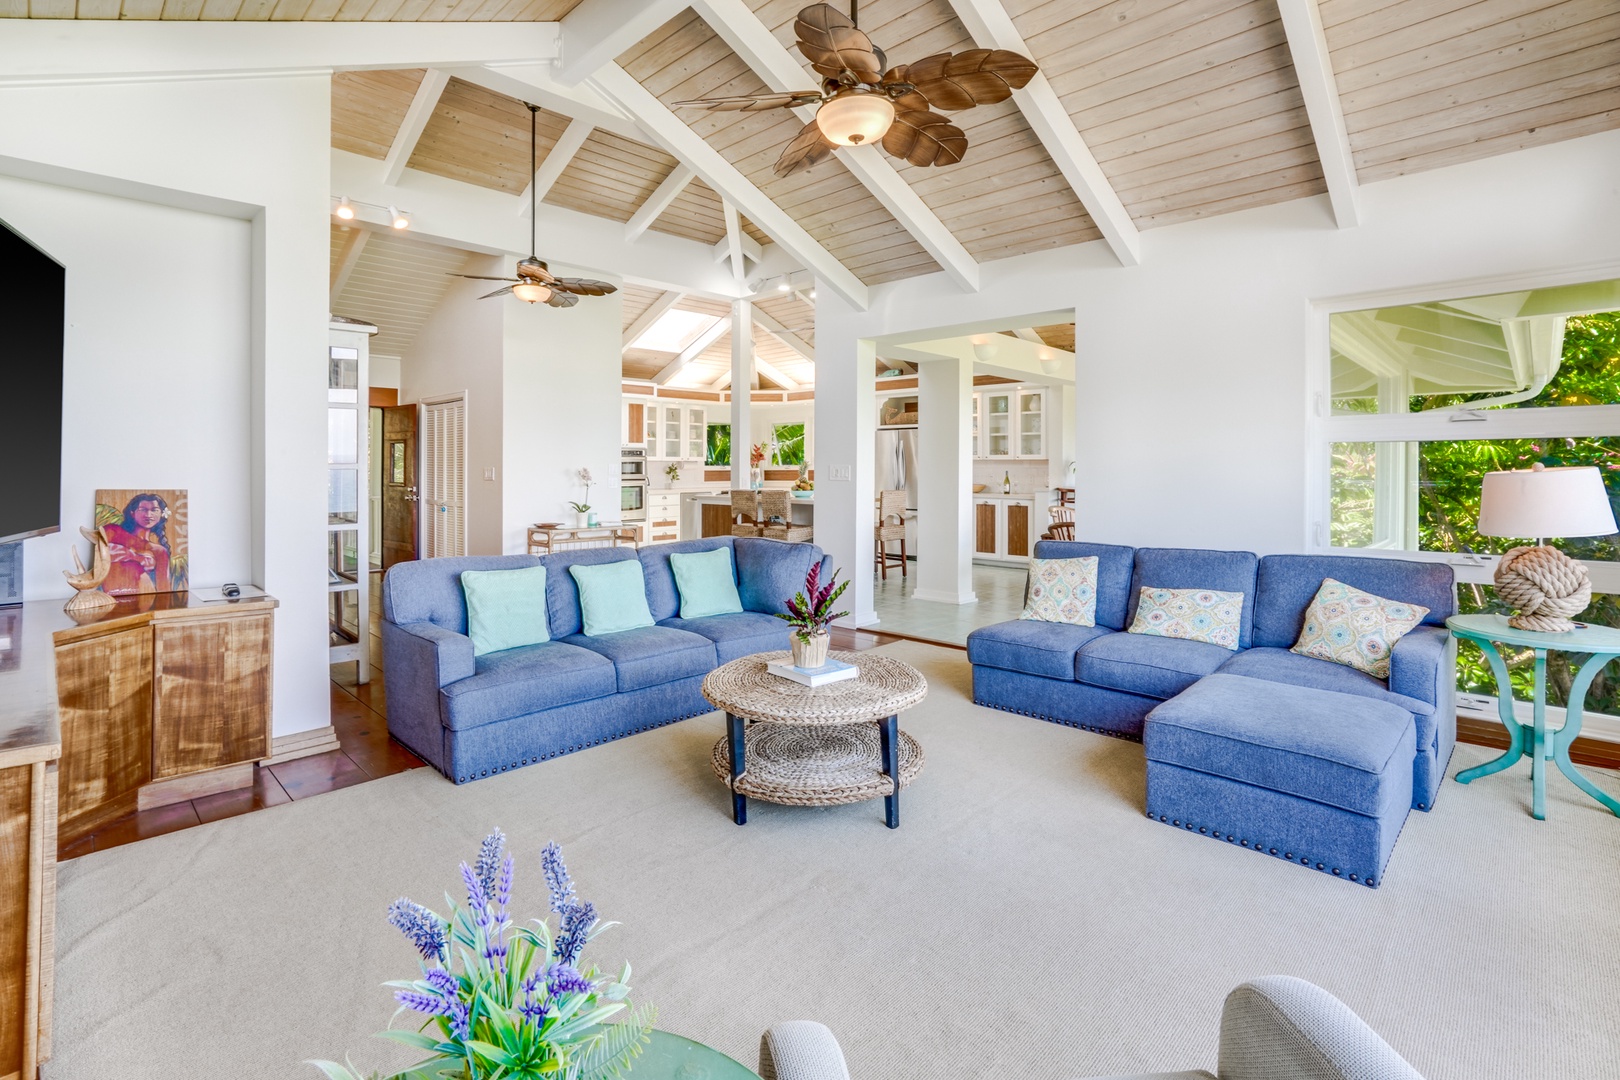 Princeville Vacation Rentals, Wai Lani - The vaulted ceilings and beams, combined with the abundance of natural light, create an open and airy ambiance.